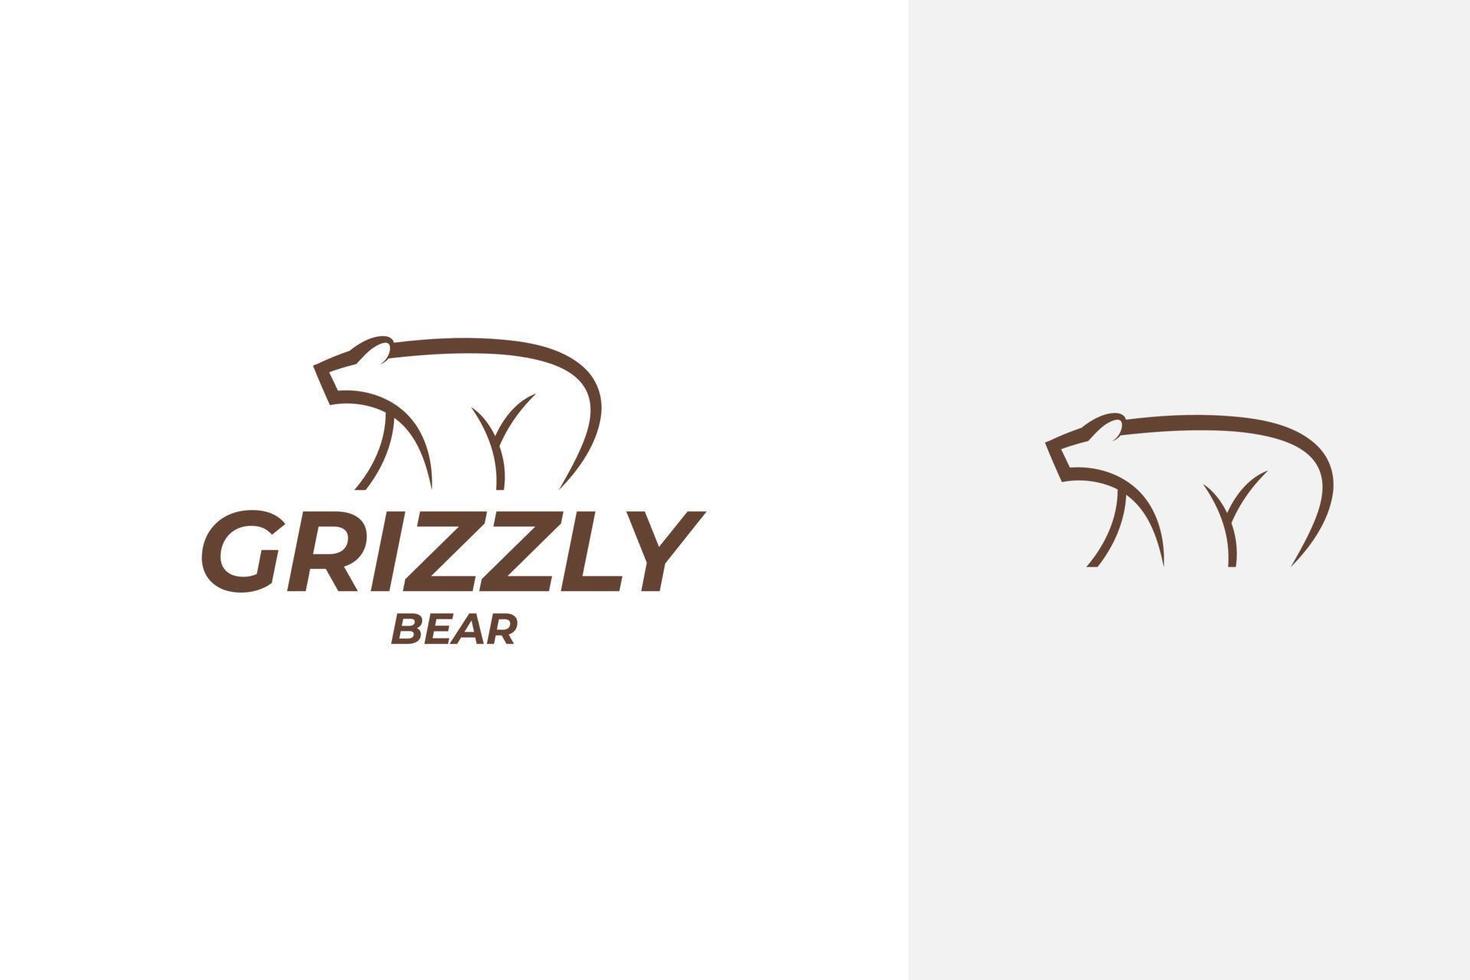 grizzly bear vector logo design in outline, line art style